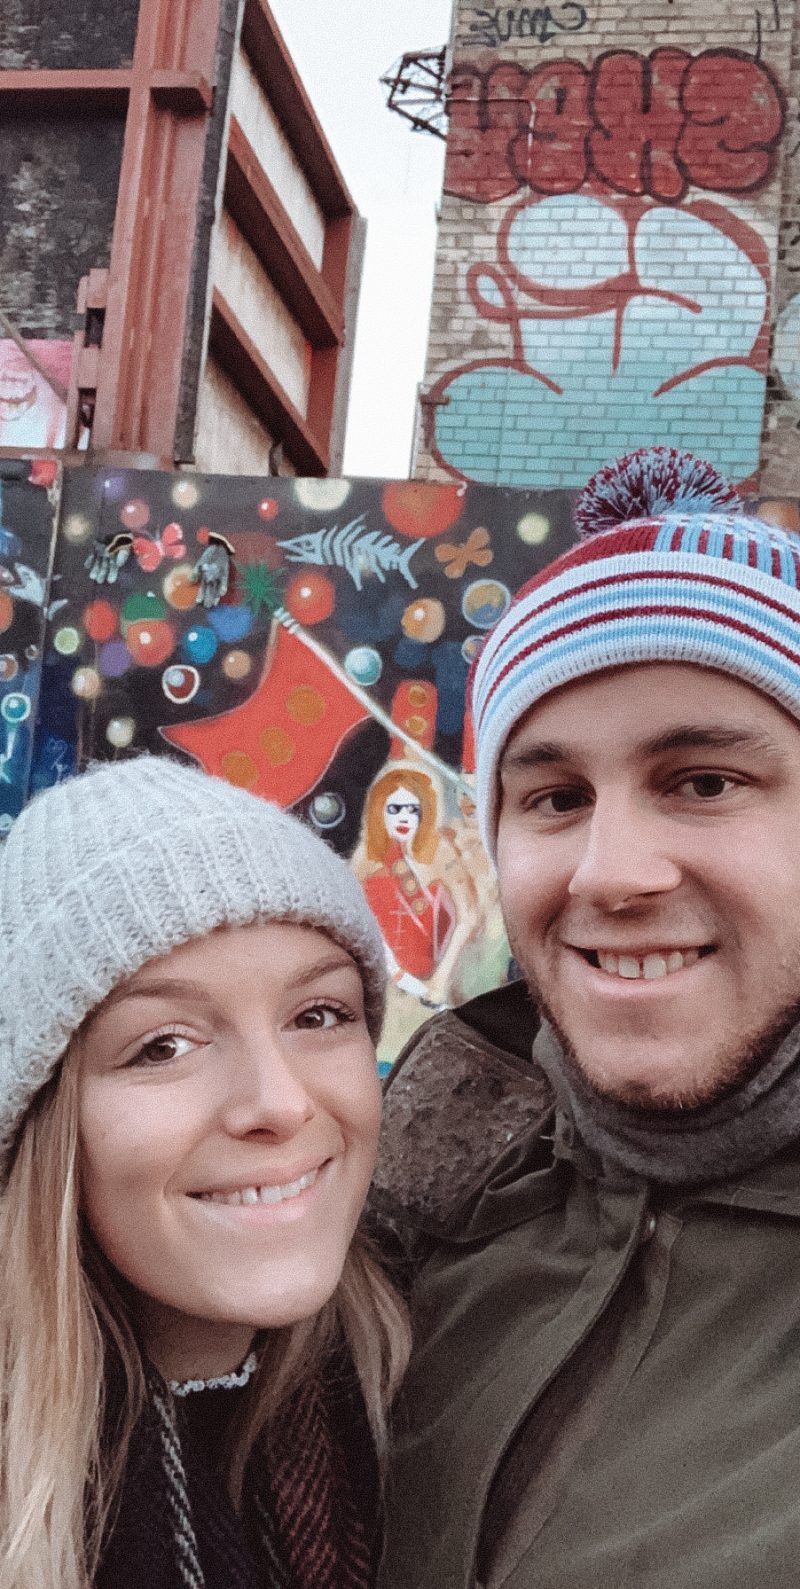 Two people having a selfie in front of graffiti.